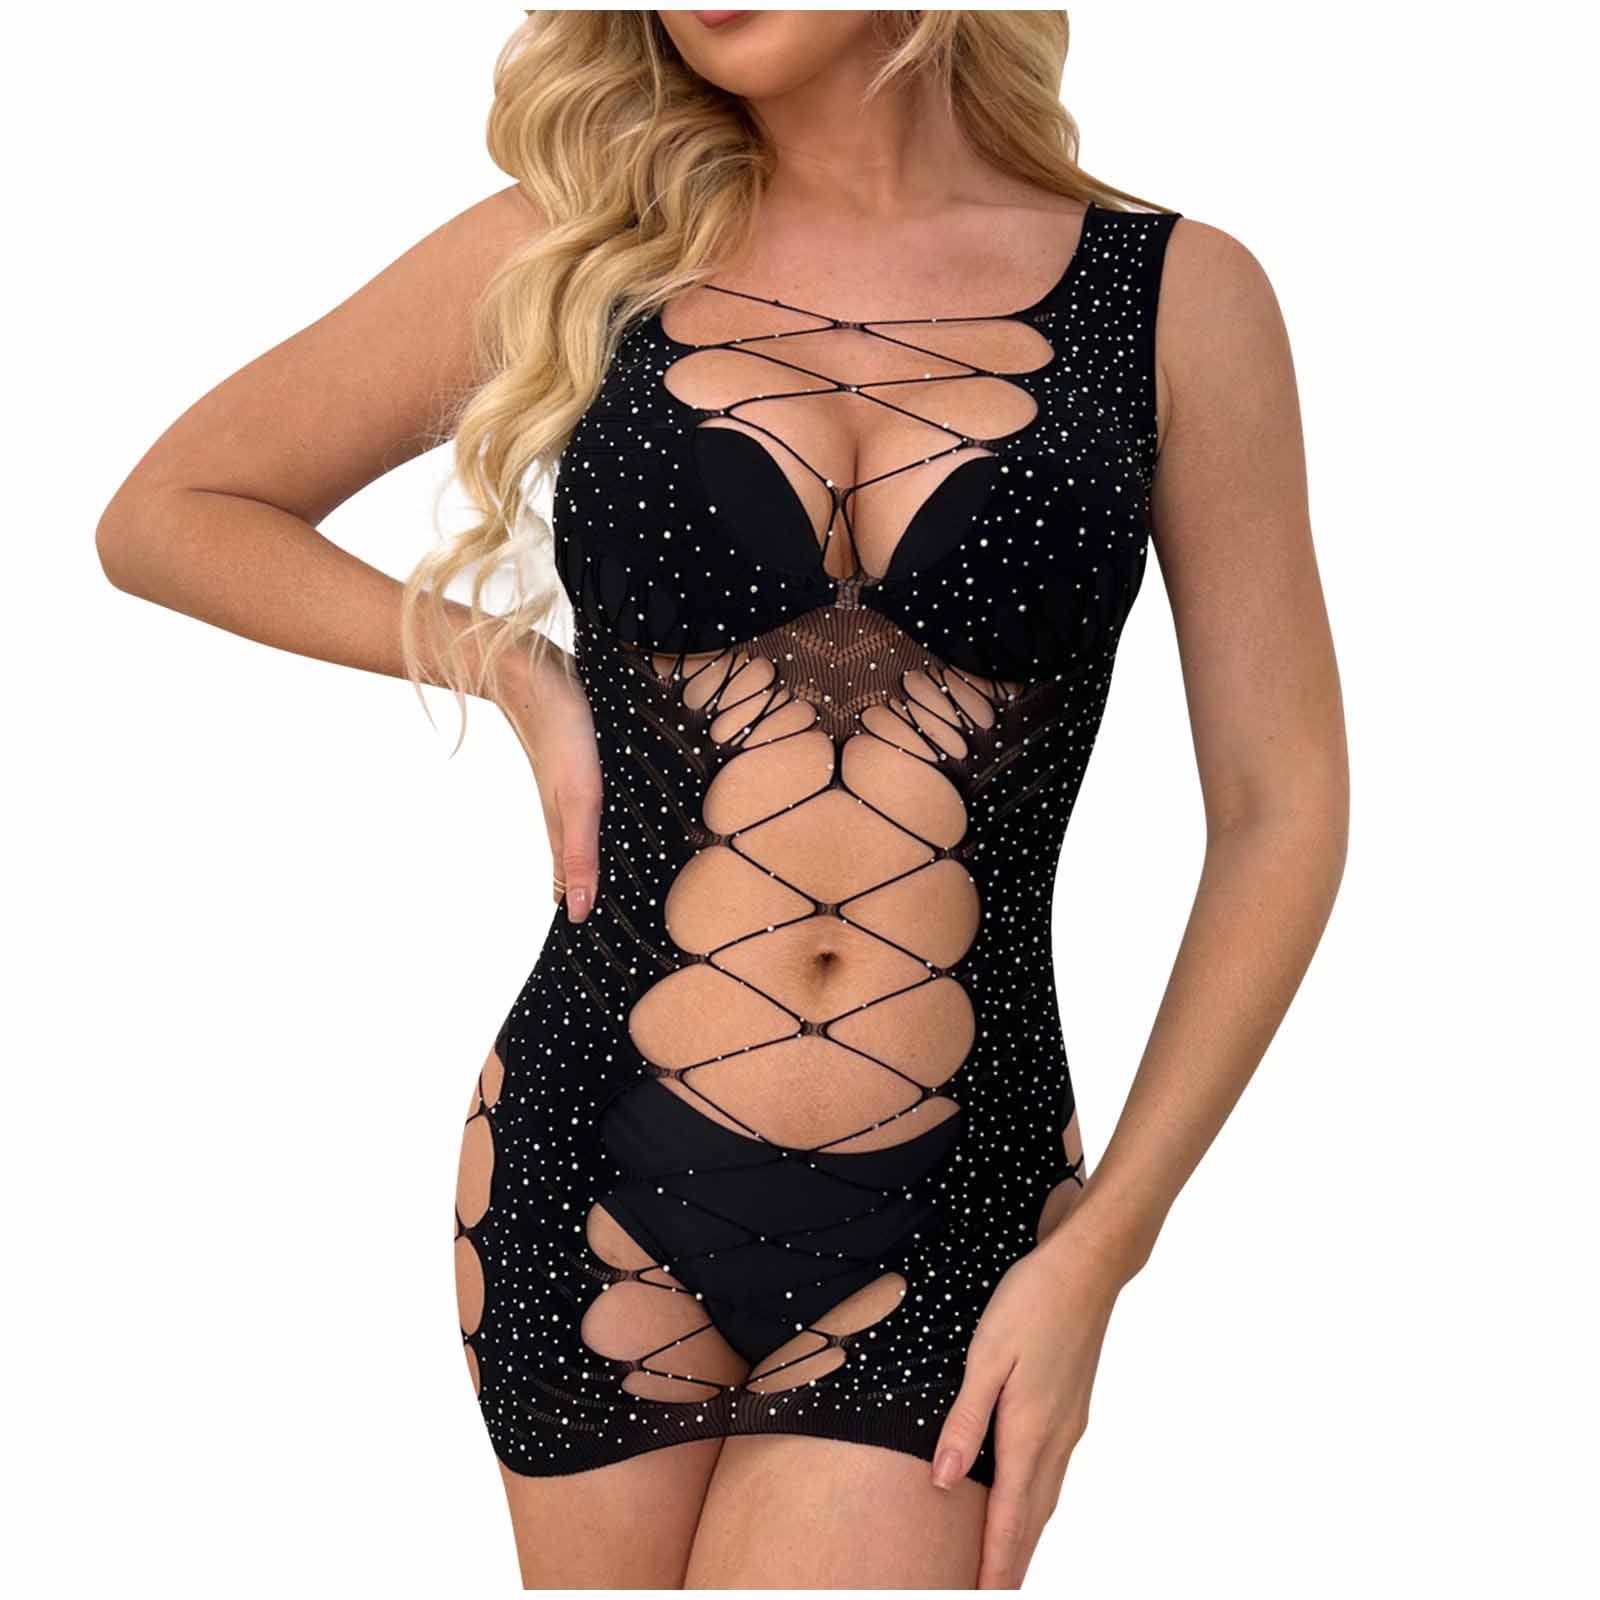 Dinnesis Sexy Lingerie Women's Large Size Fashion Sexy Drill